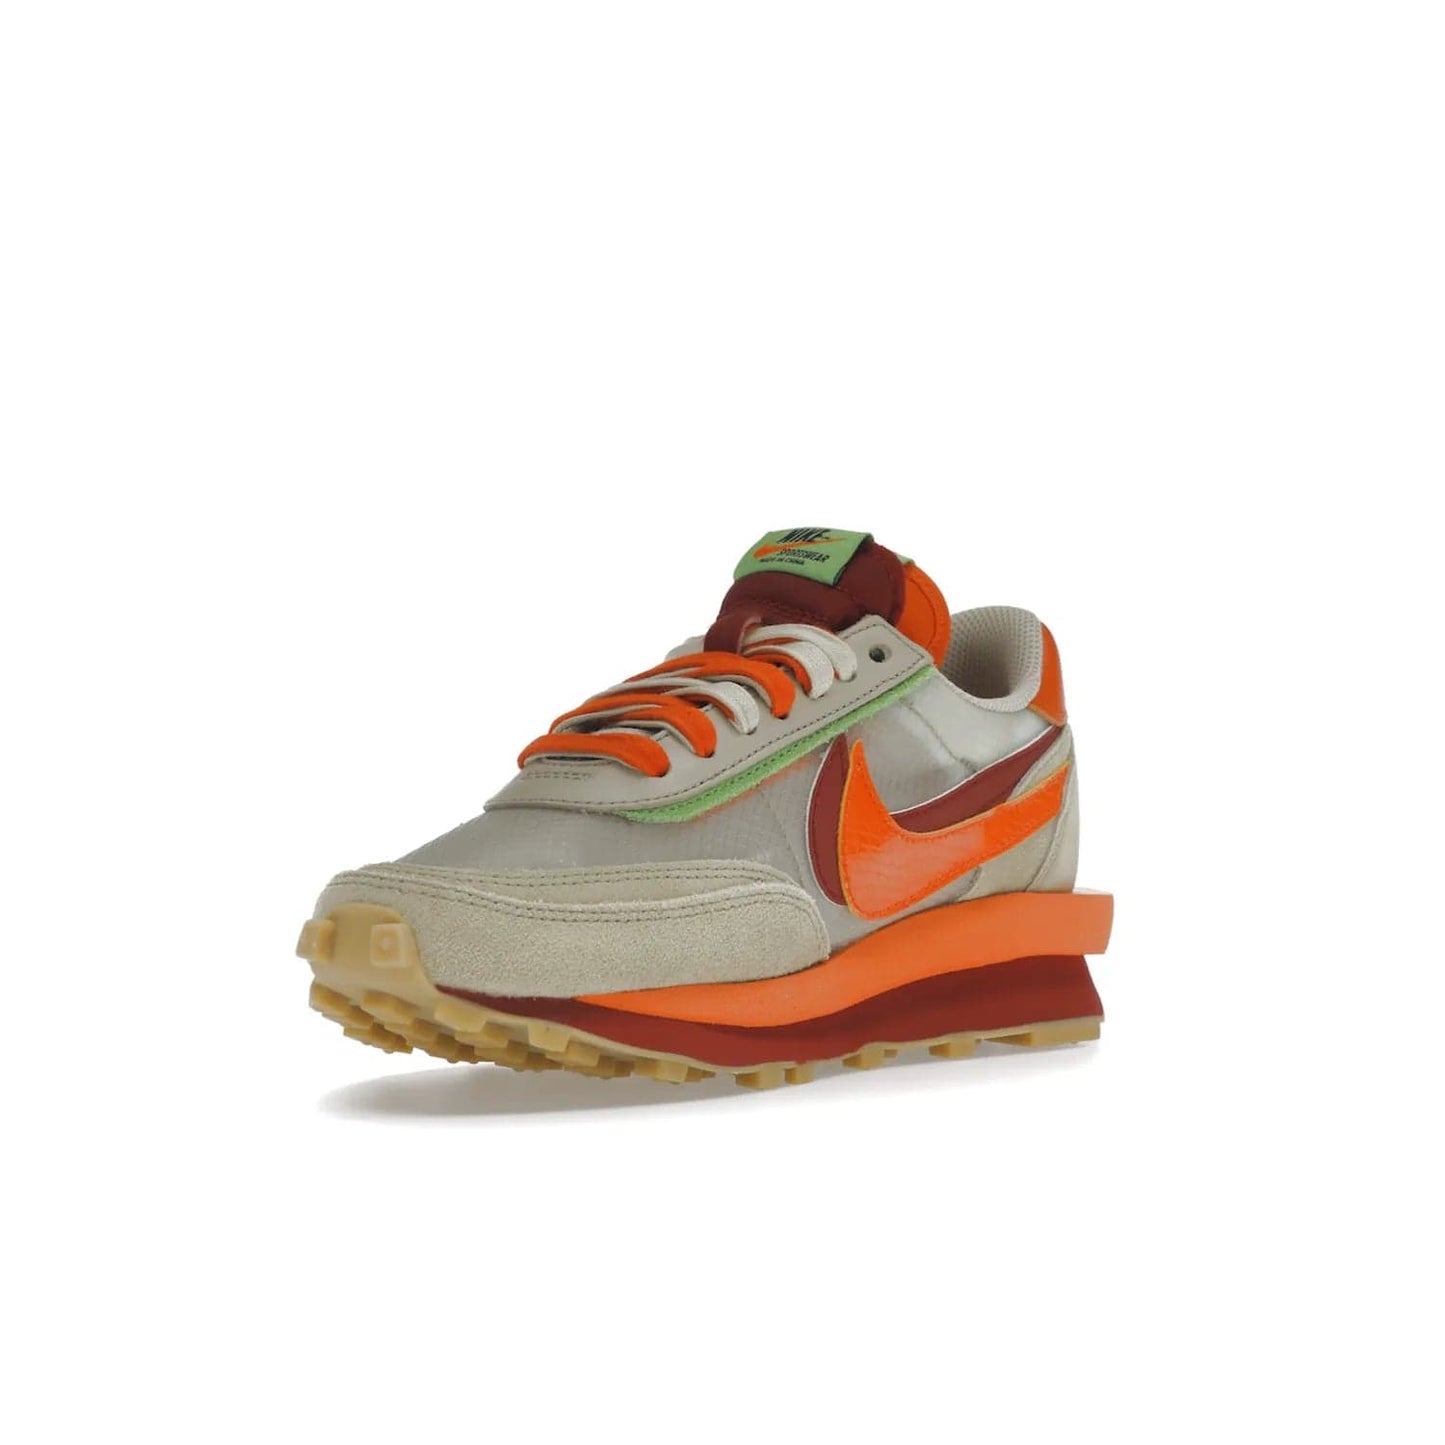 Nike LD Waffle sacai CLOT Kiss of Death Net Orange Blaze - Image 14 - Only at www.BallersClubKickz.com - A bold and stylish Nike LD Waffle sacai CLOT Kiss of Death Net Orange Blaze sneaker featuring a unique off-white, Deep Red & Orange Blaze Swooshes, two-toned stacked sole and doubled tongue. Available in September 2021. Make a statement.